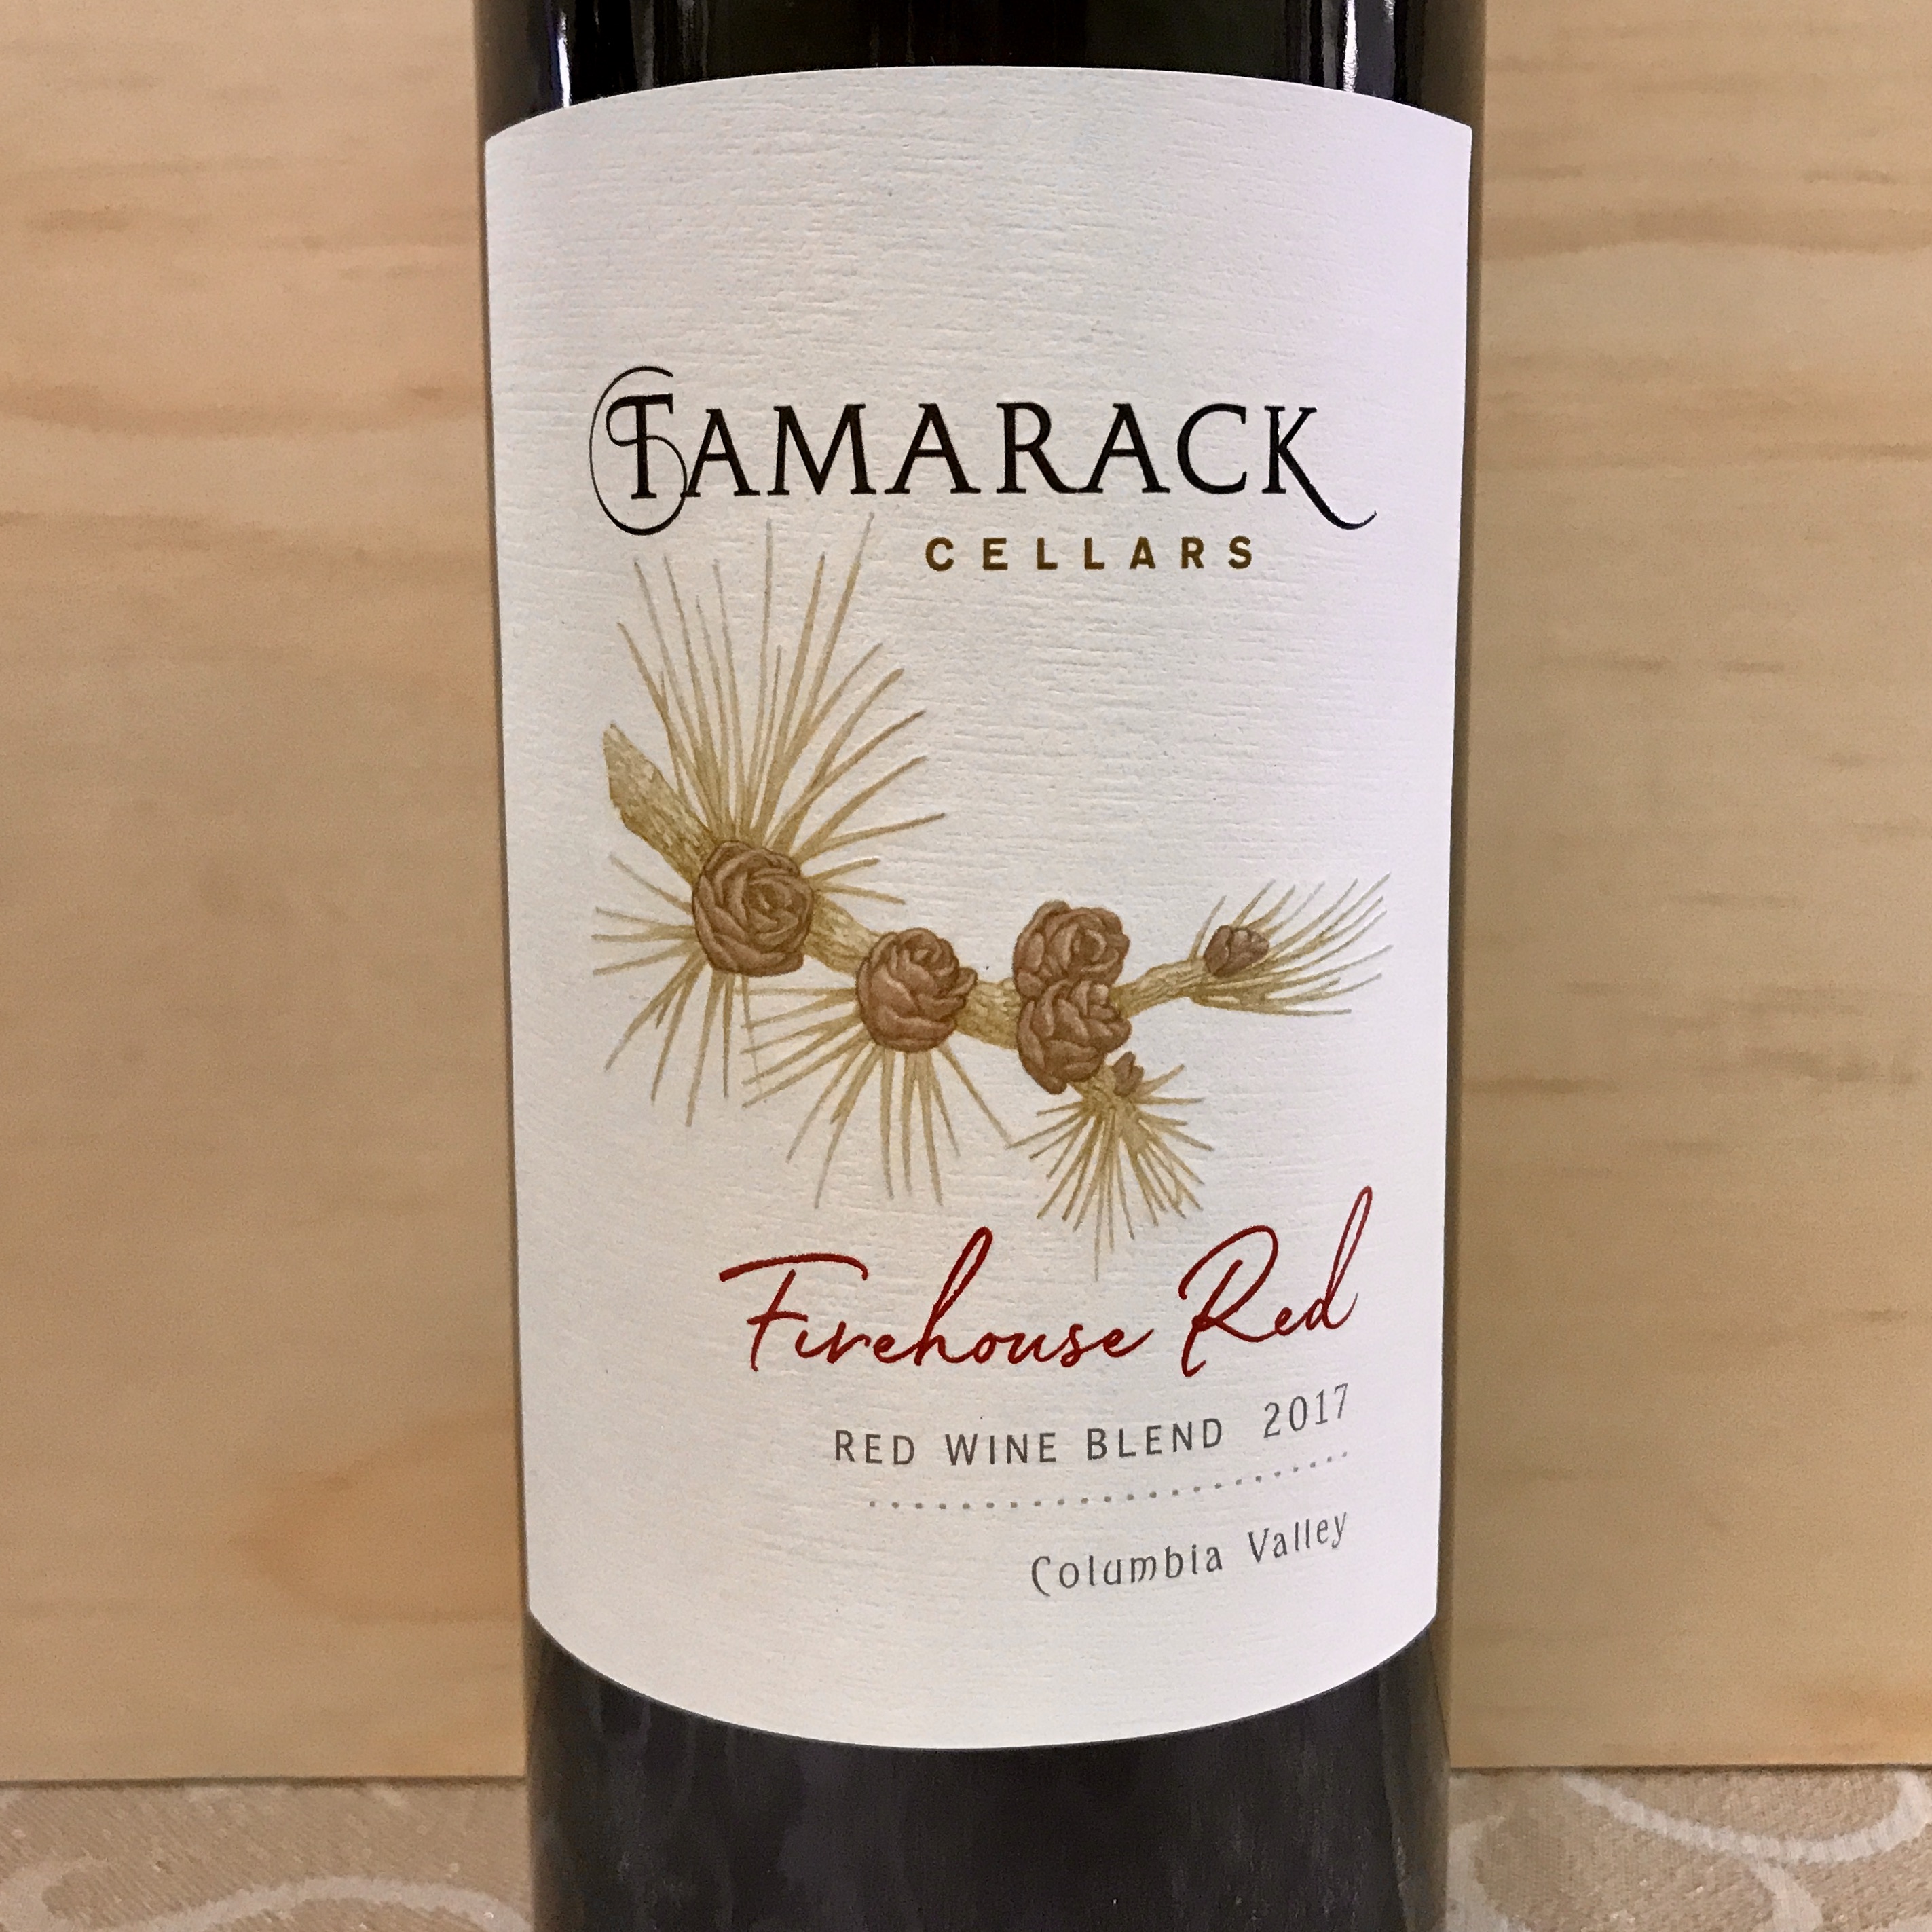 Tamarack Cellars Firehouse Red blend Columbia Valley 2017